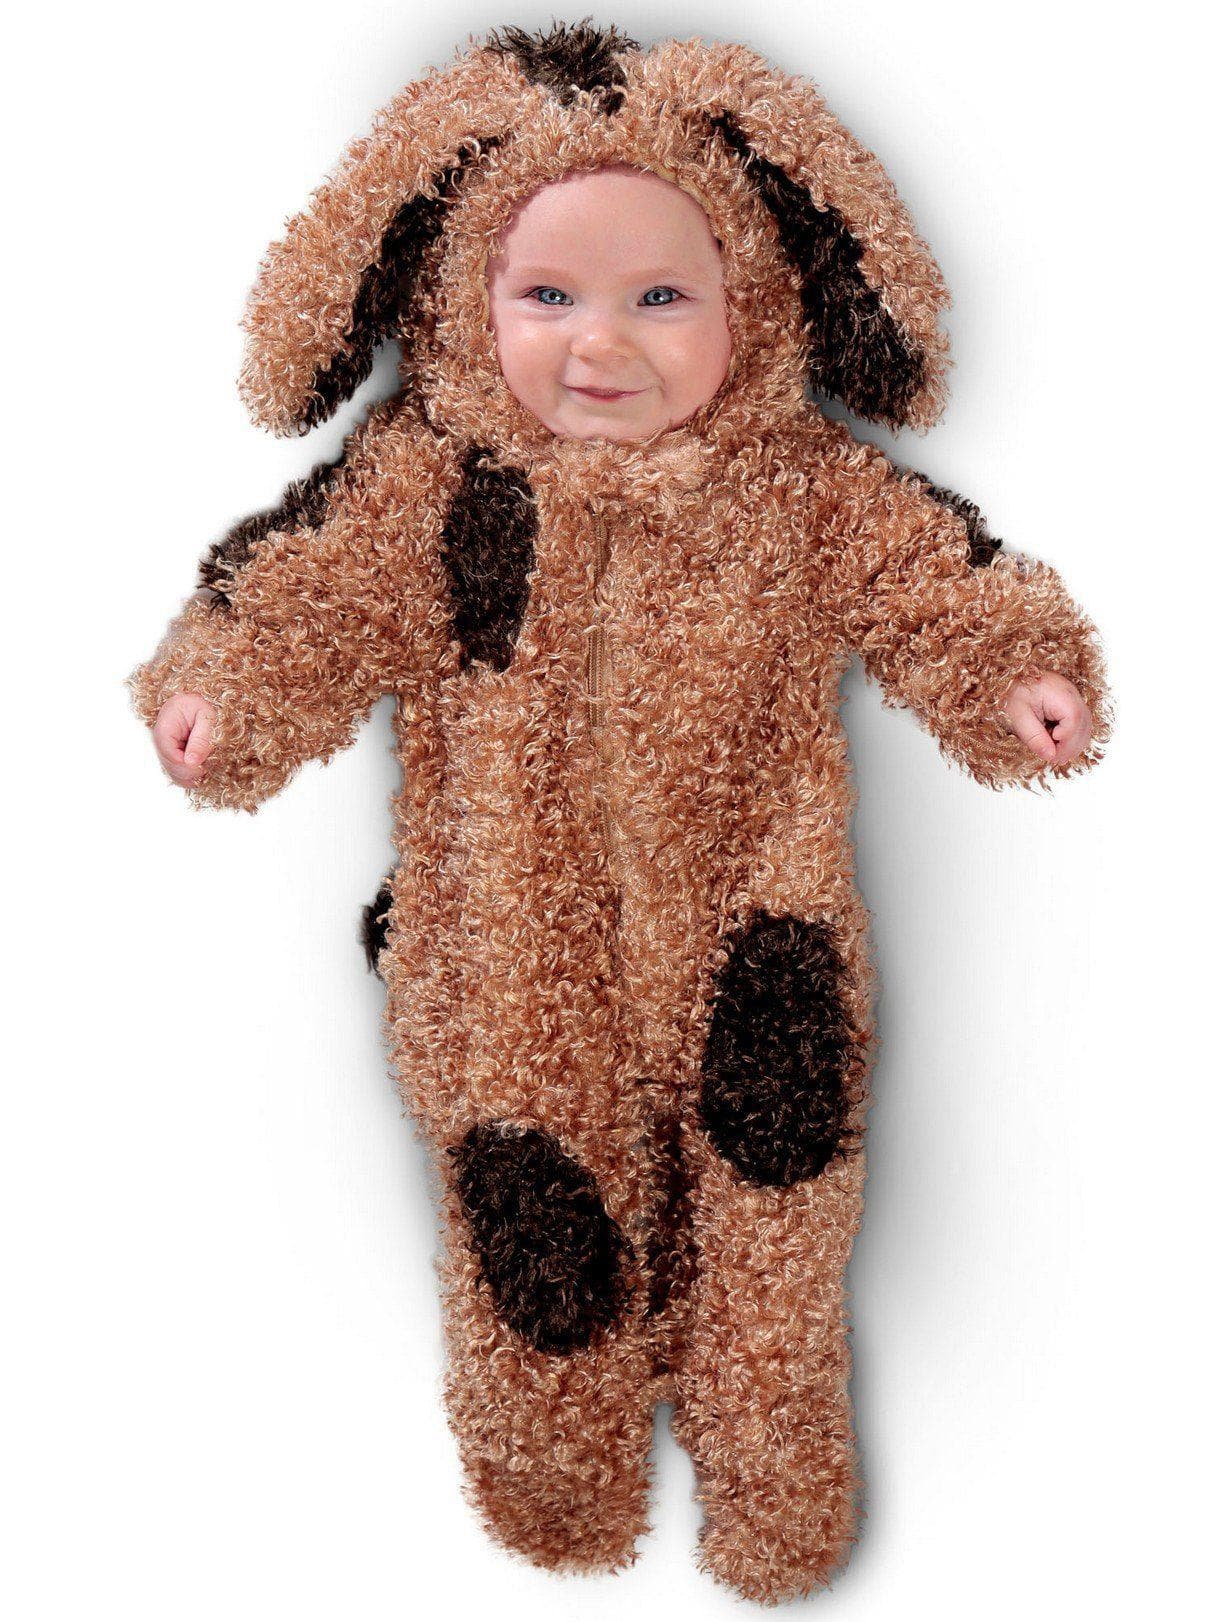 Baby/Toddler Bentley the Puppy Costume - costumes.com